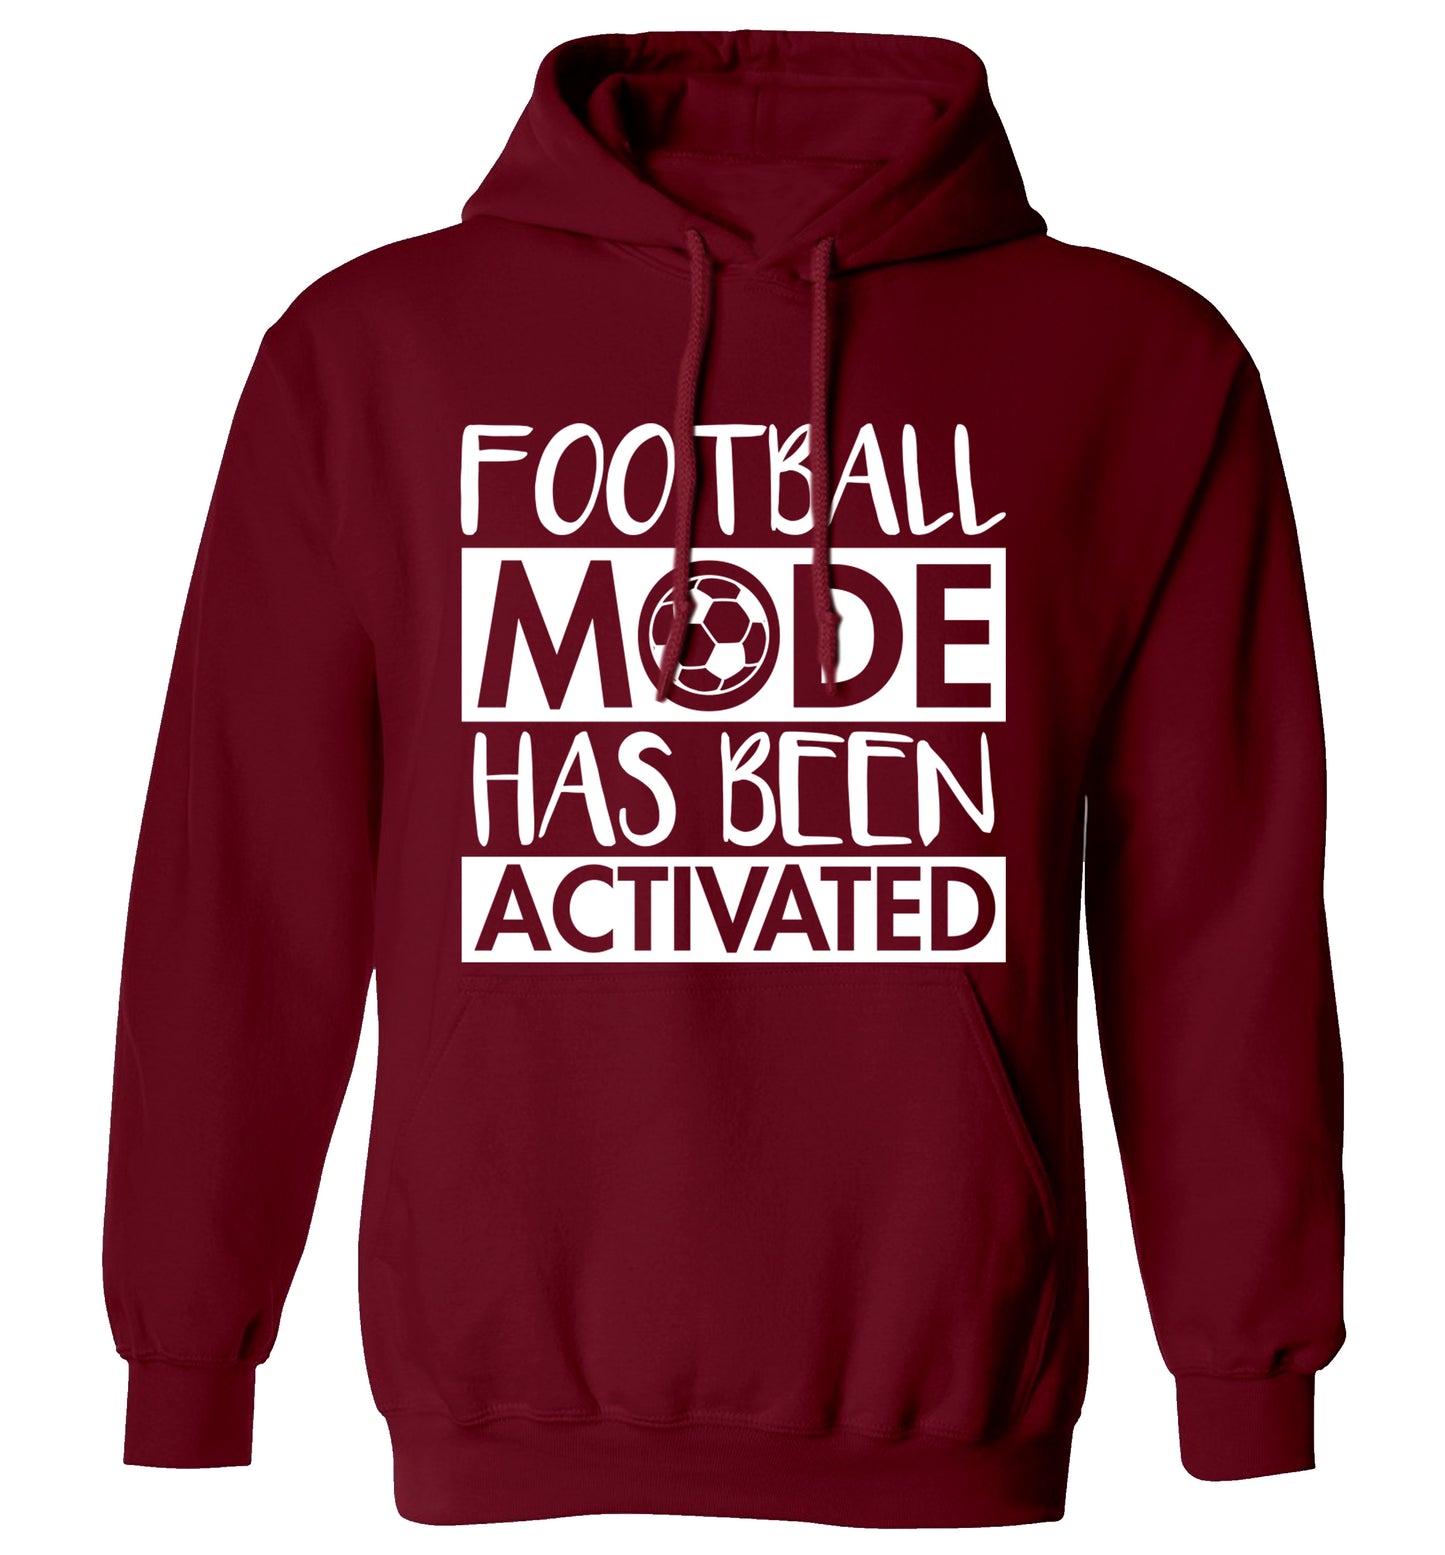 Football mode has been activated adults unisexmaroon hoodie 2XL